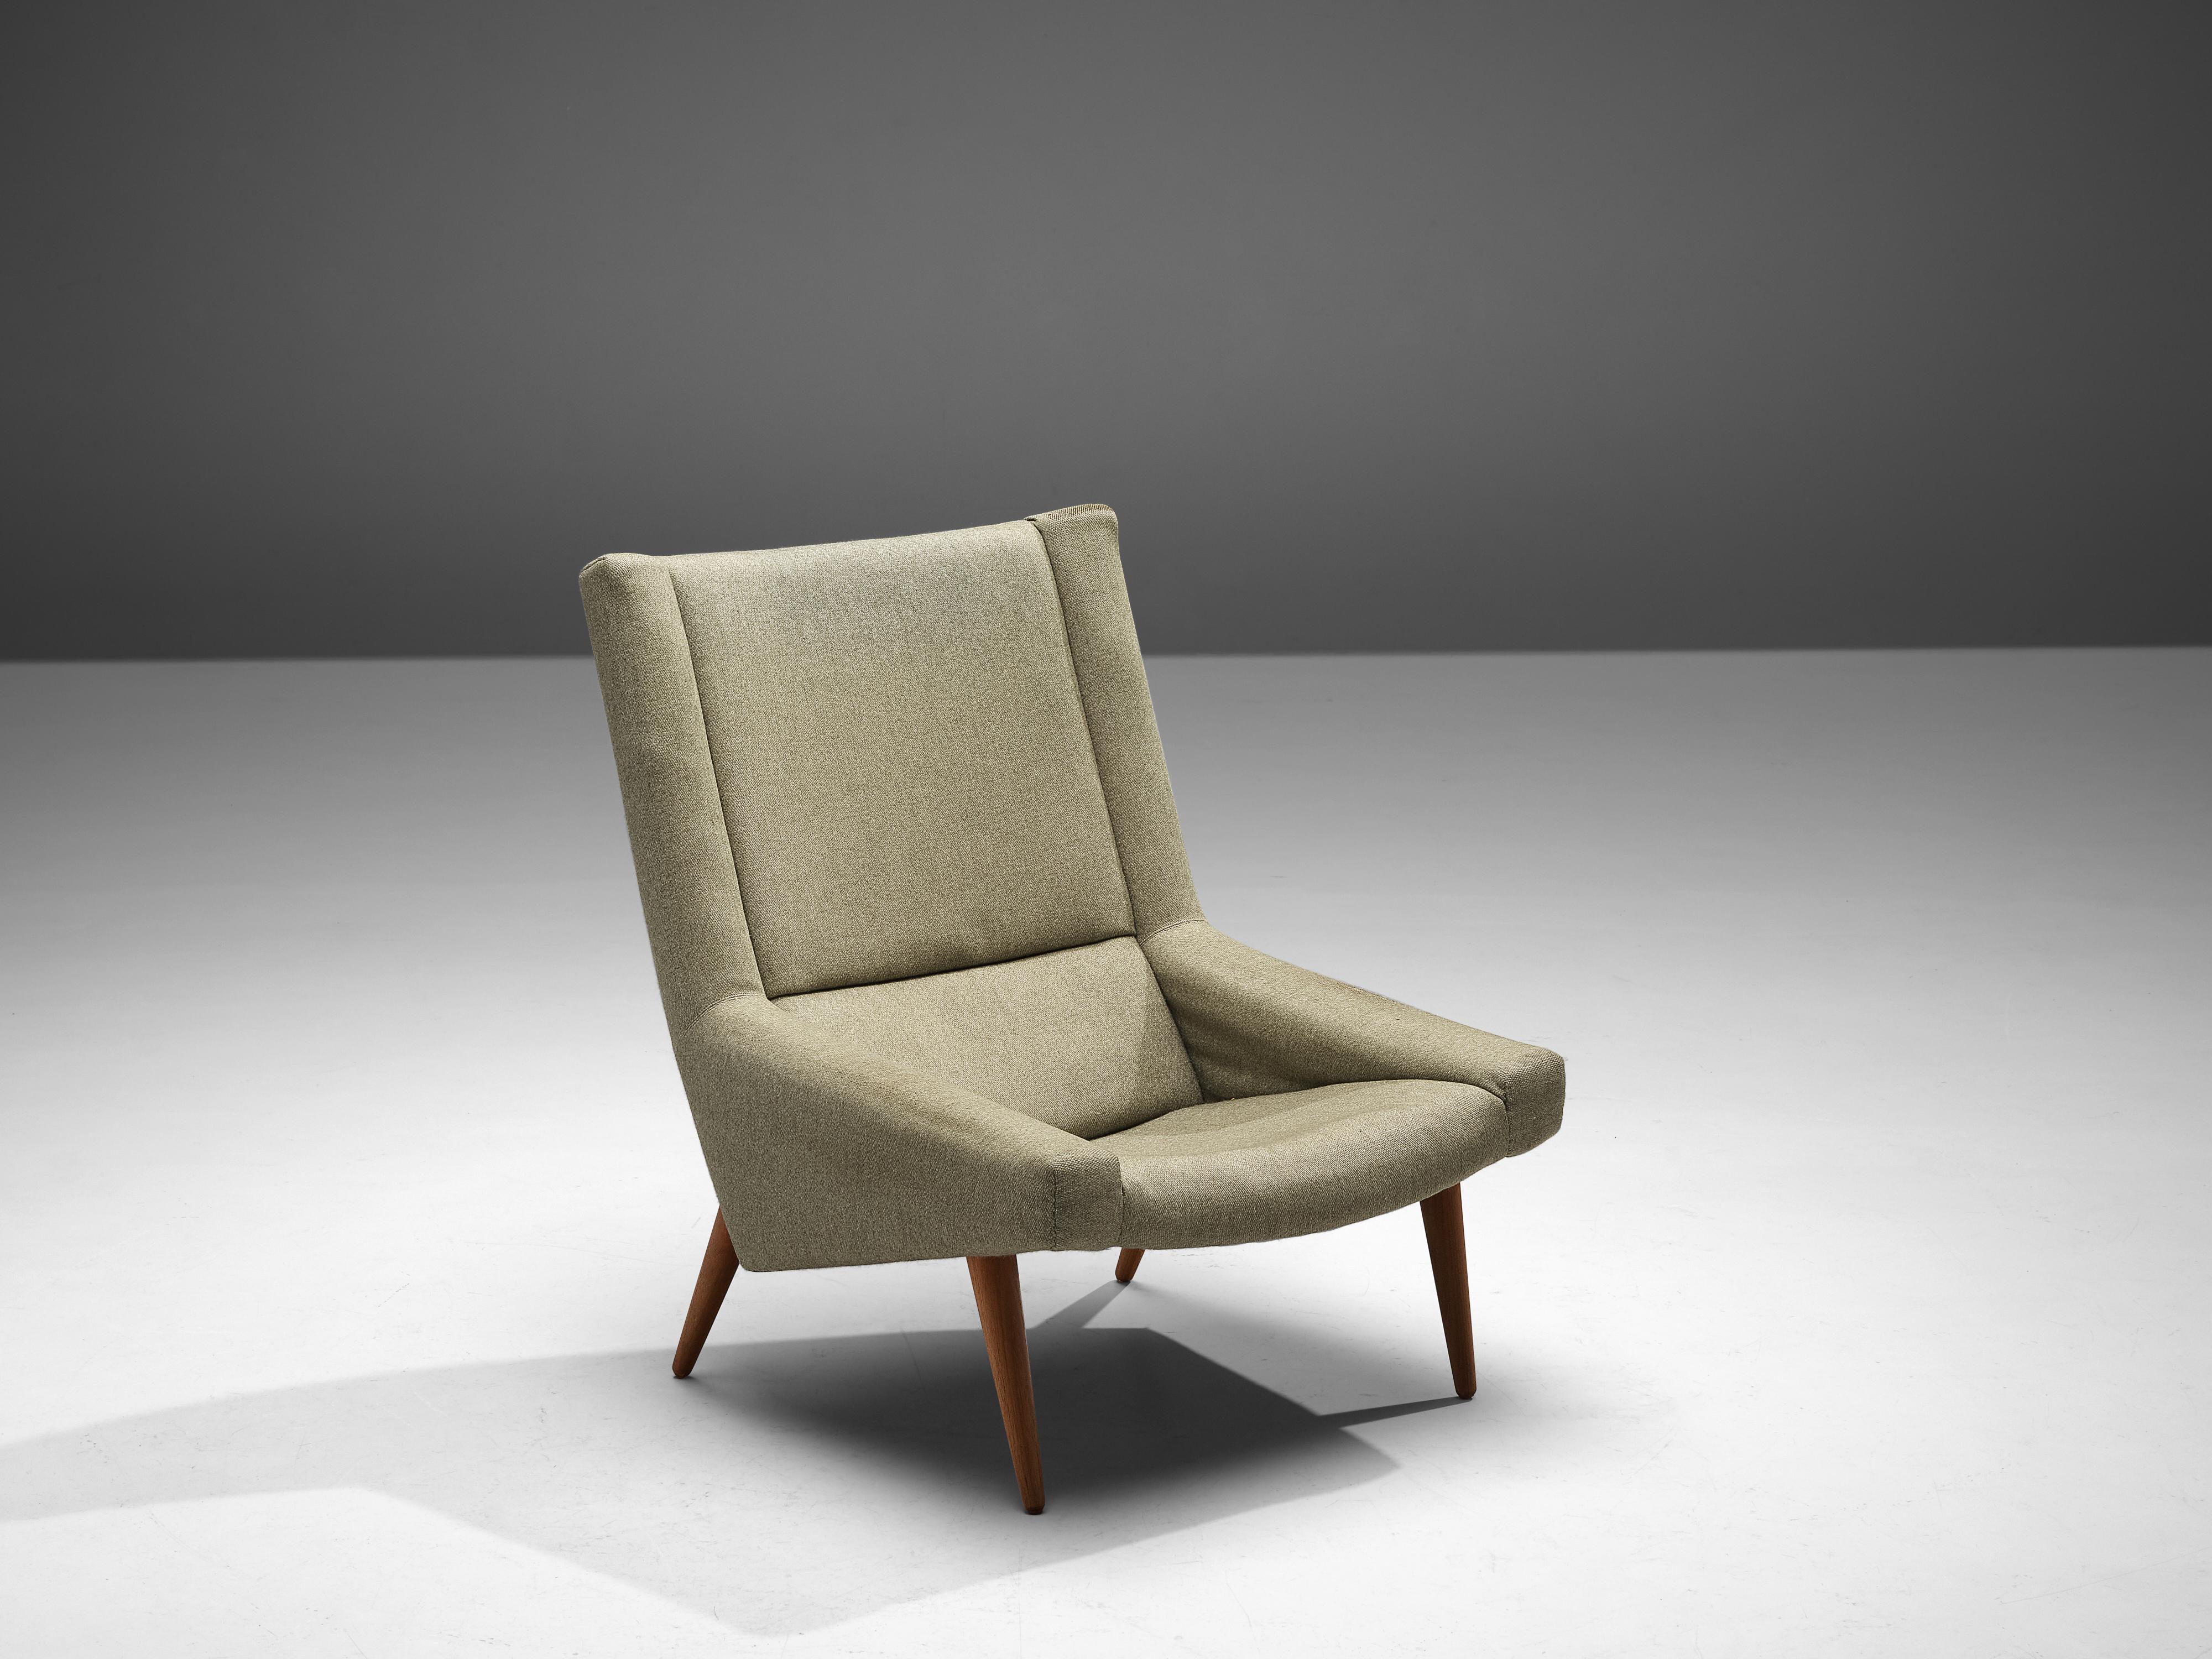 Illum Wikkelsø, lounge chair, fabric upholstery, teak Denmark, 1950s

Comfortable lounge chair by Danish designer Illum Wikkelsø. The shape of the chair is characterized by the high backrest that floats over into the low, pointy armrests. A